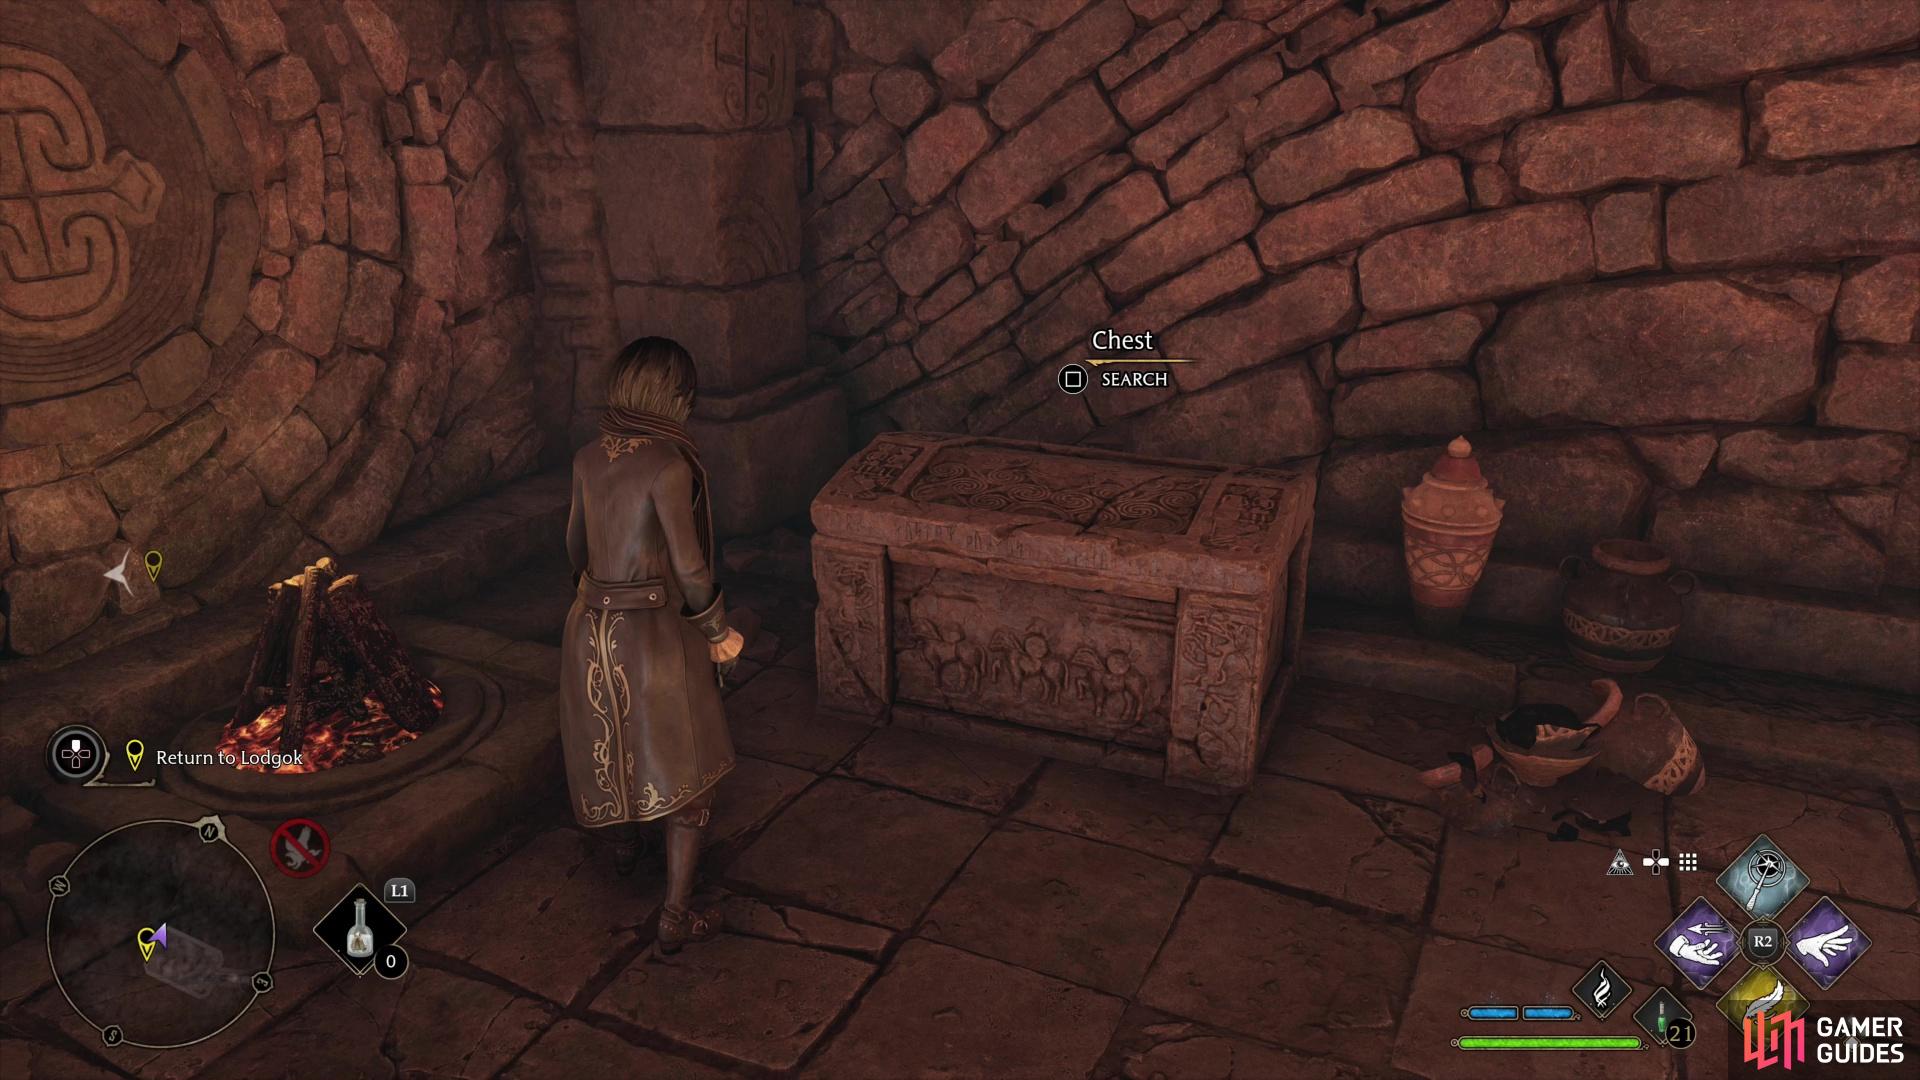 then loot a large chest near the tomb.